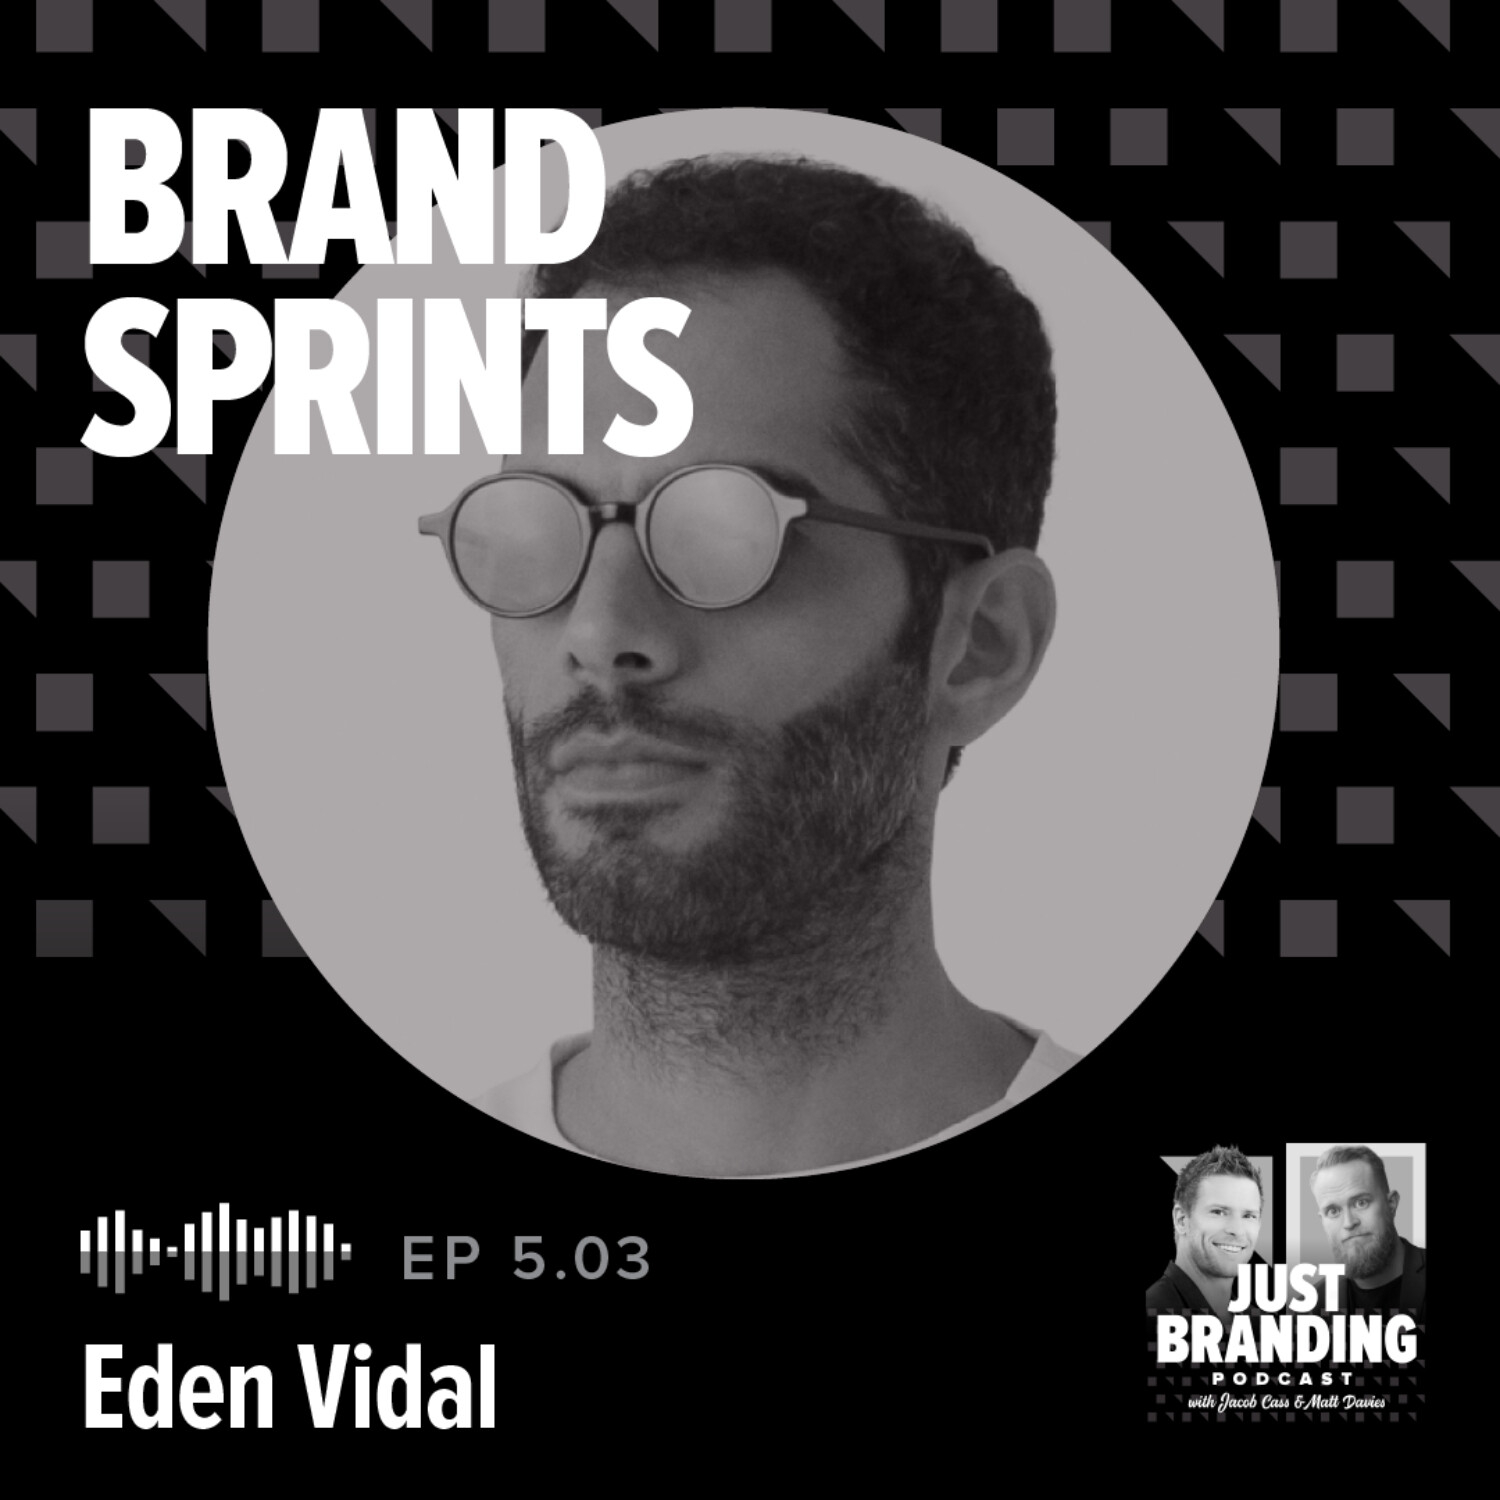 S05.EP03 - How to Launch a Brand in 10 Days with Brand Sprints (w/ Eden Vidal)